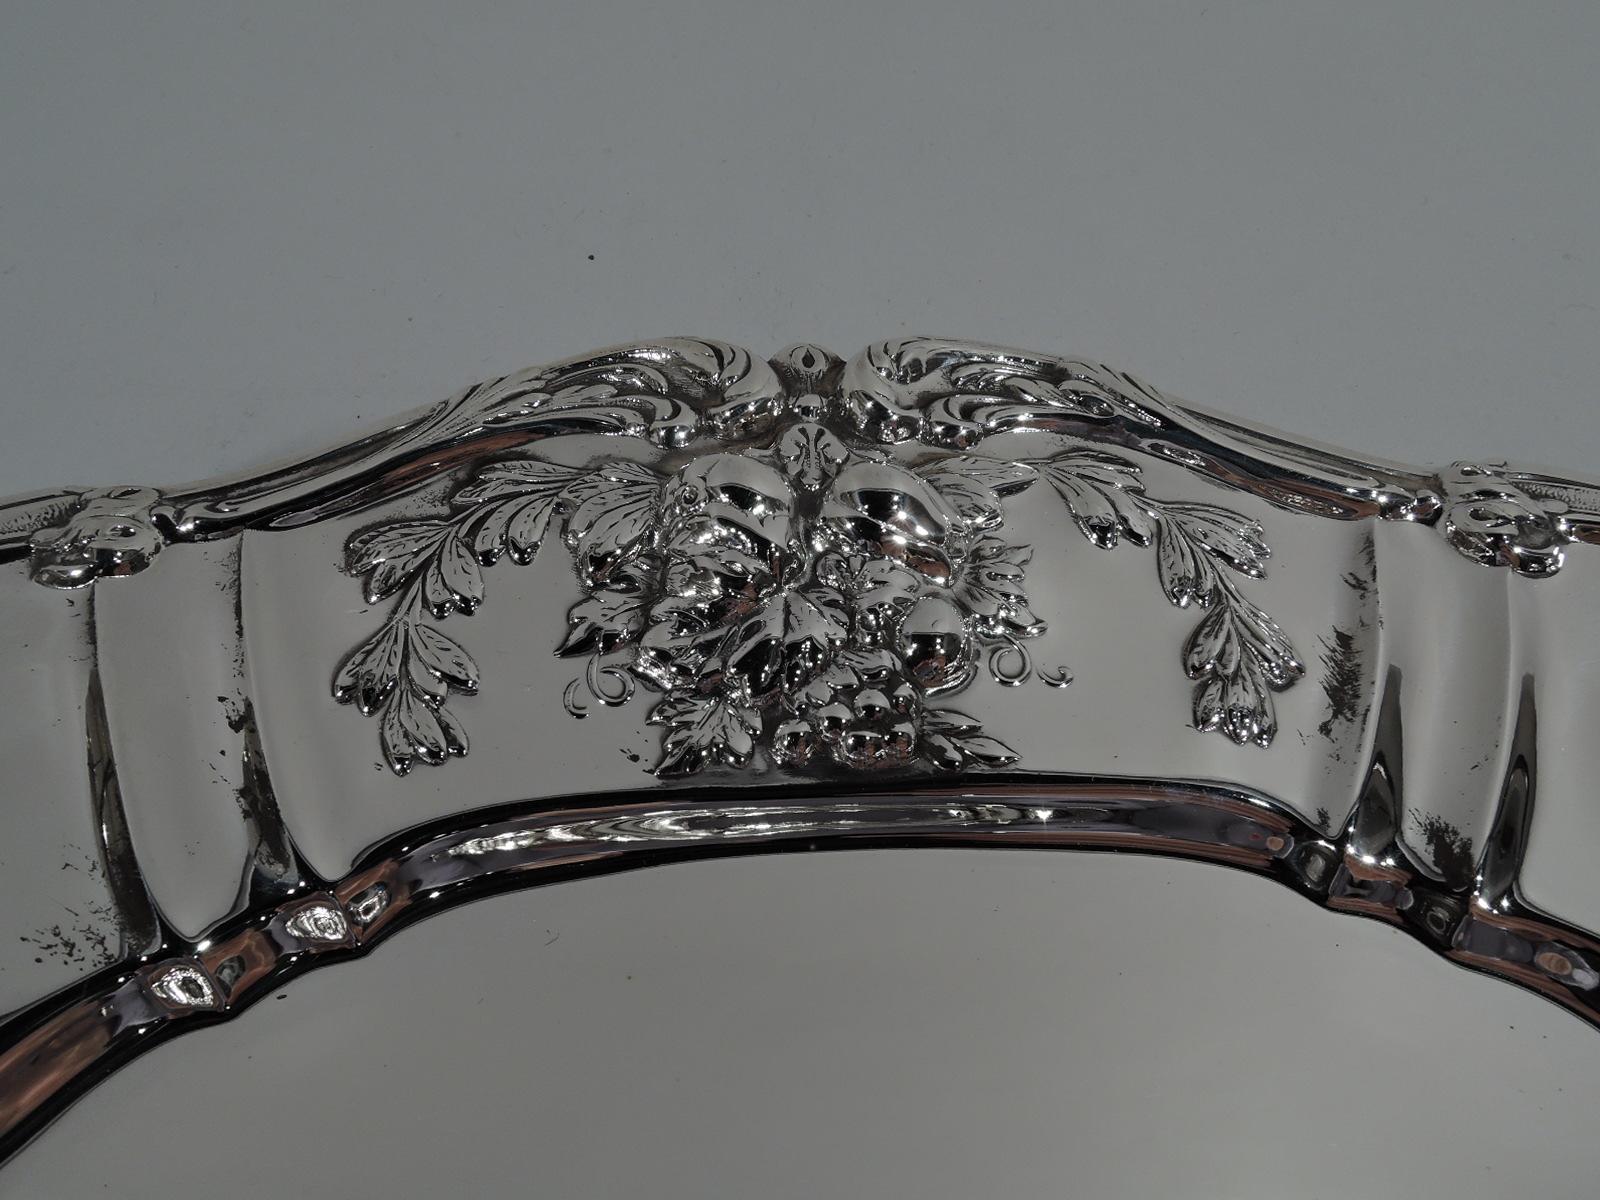 Francis I sterling silver serving plate. Made by Reed & Barton in Taunton, Mass. Shoulder has alternating wide and narrow frames with embossed vegetation, and scrolled rim. A beautiful piece in the desirable French Renaissance Revival pattern. Fully